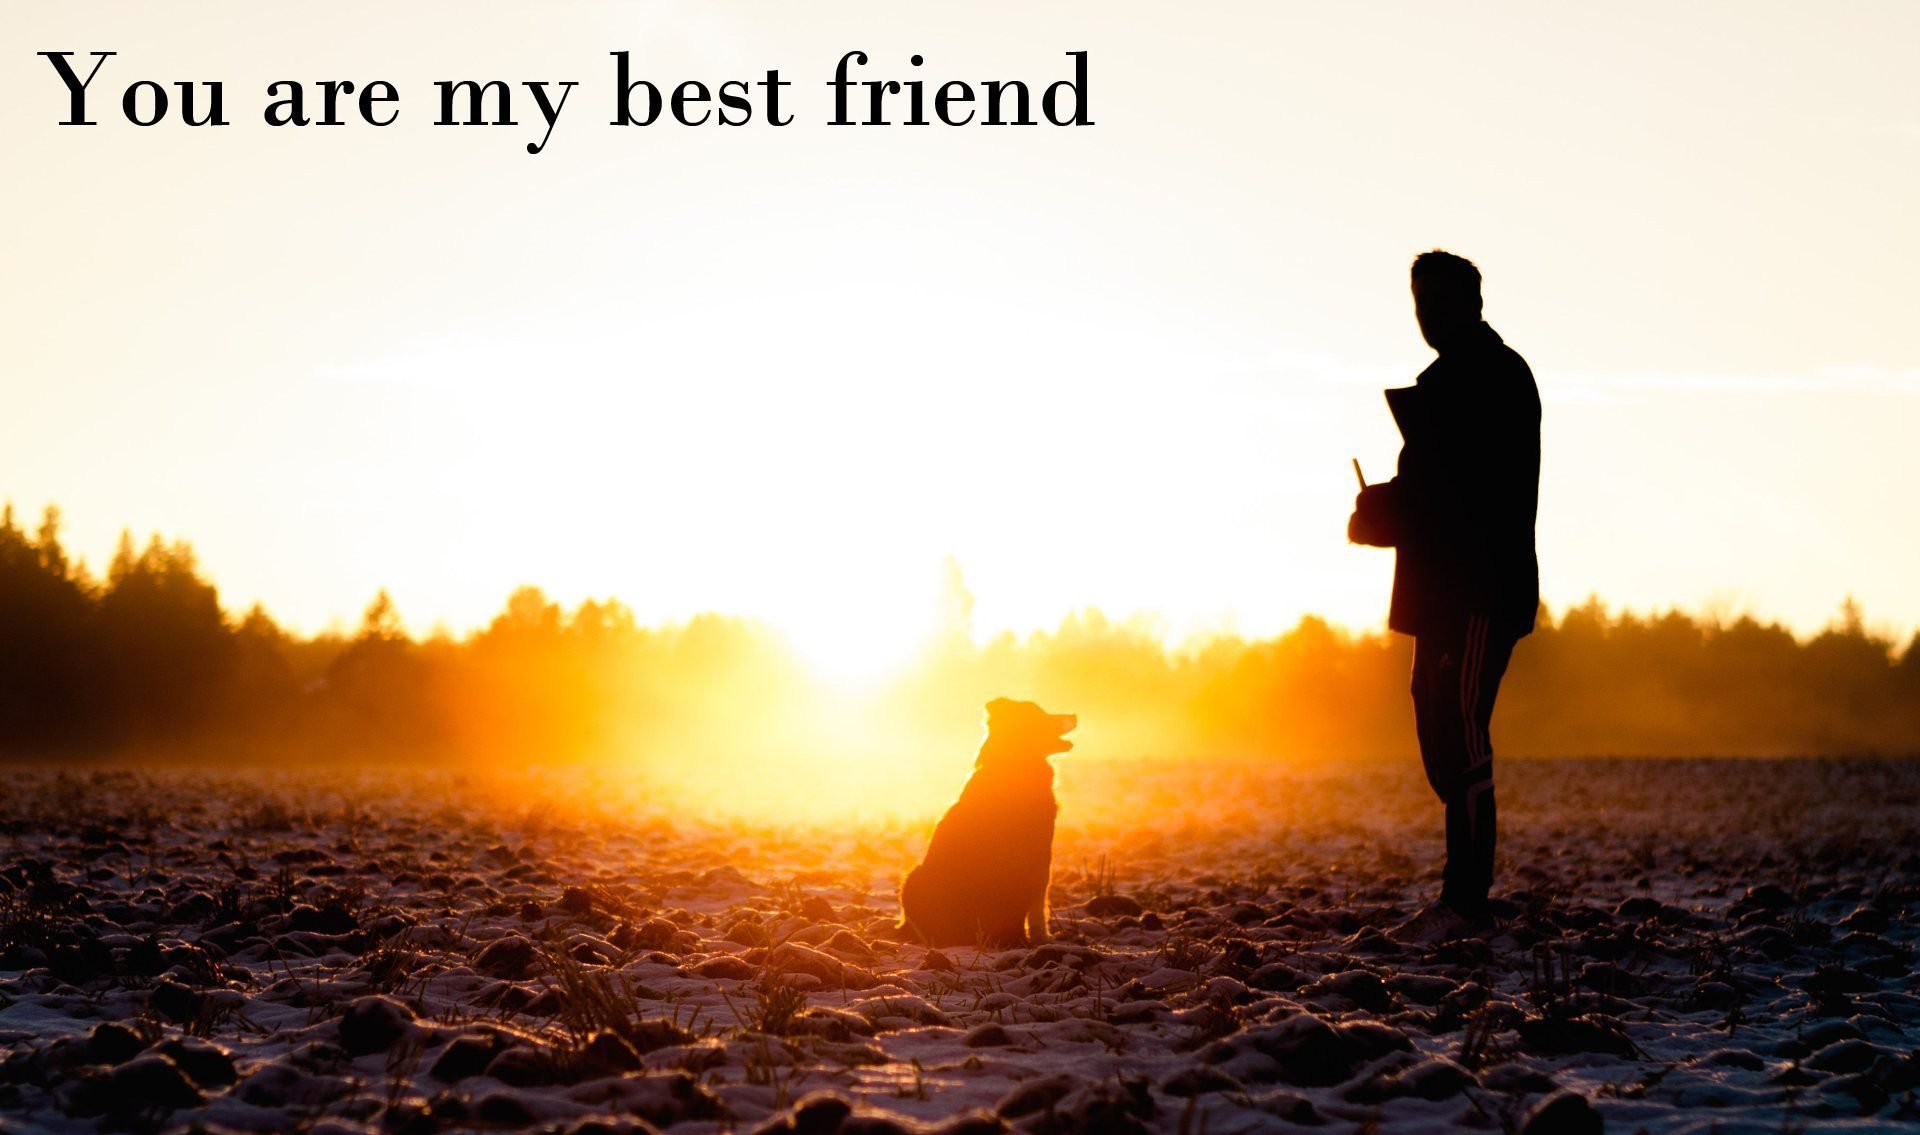 21 signs that your dog is your best friend